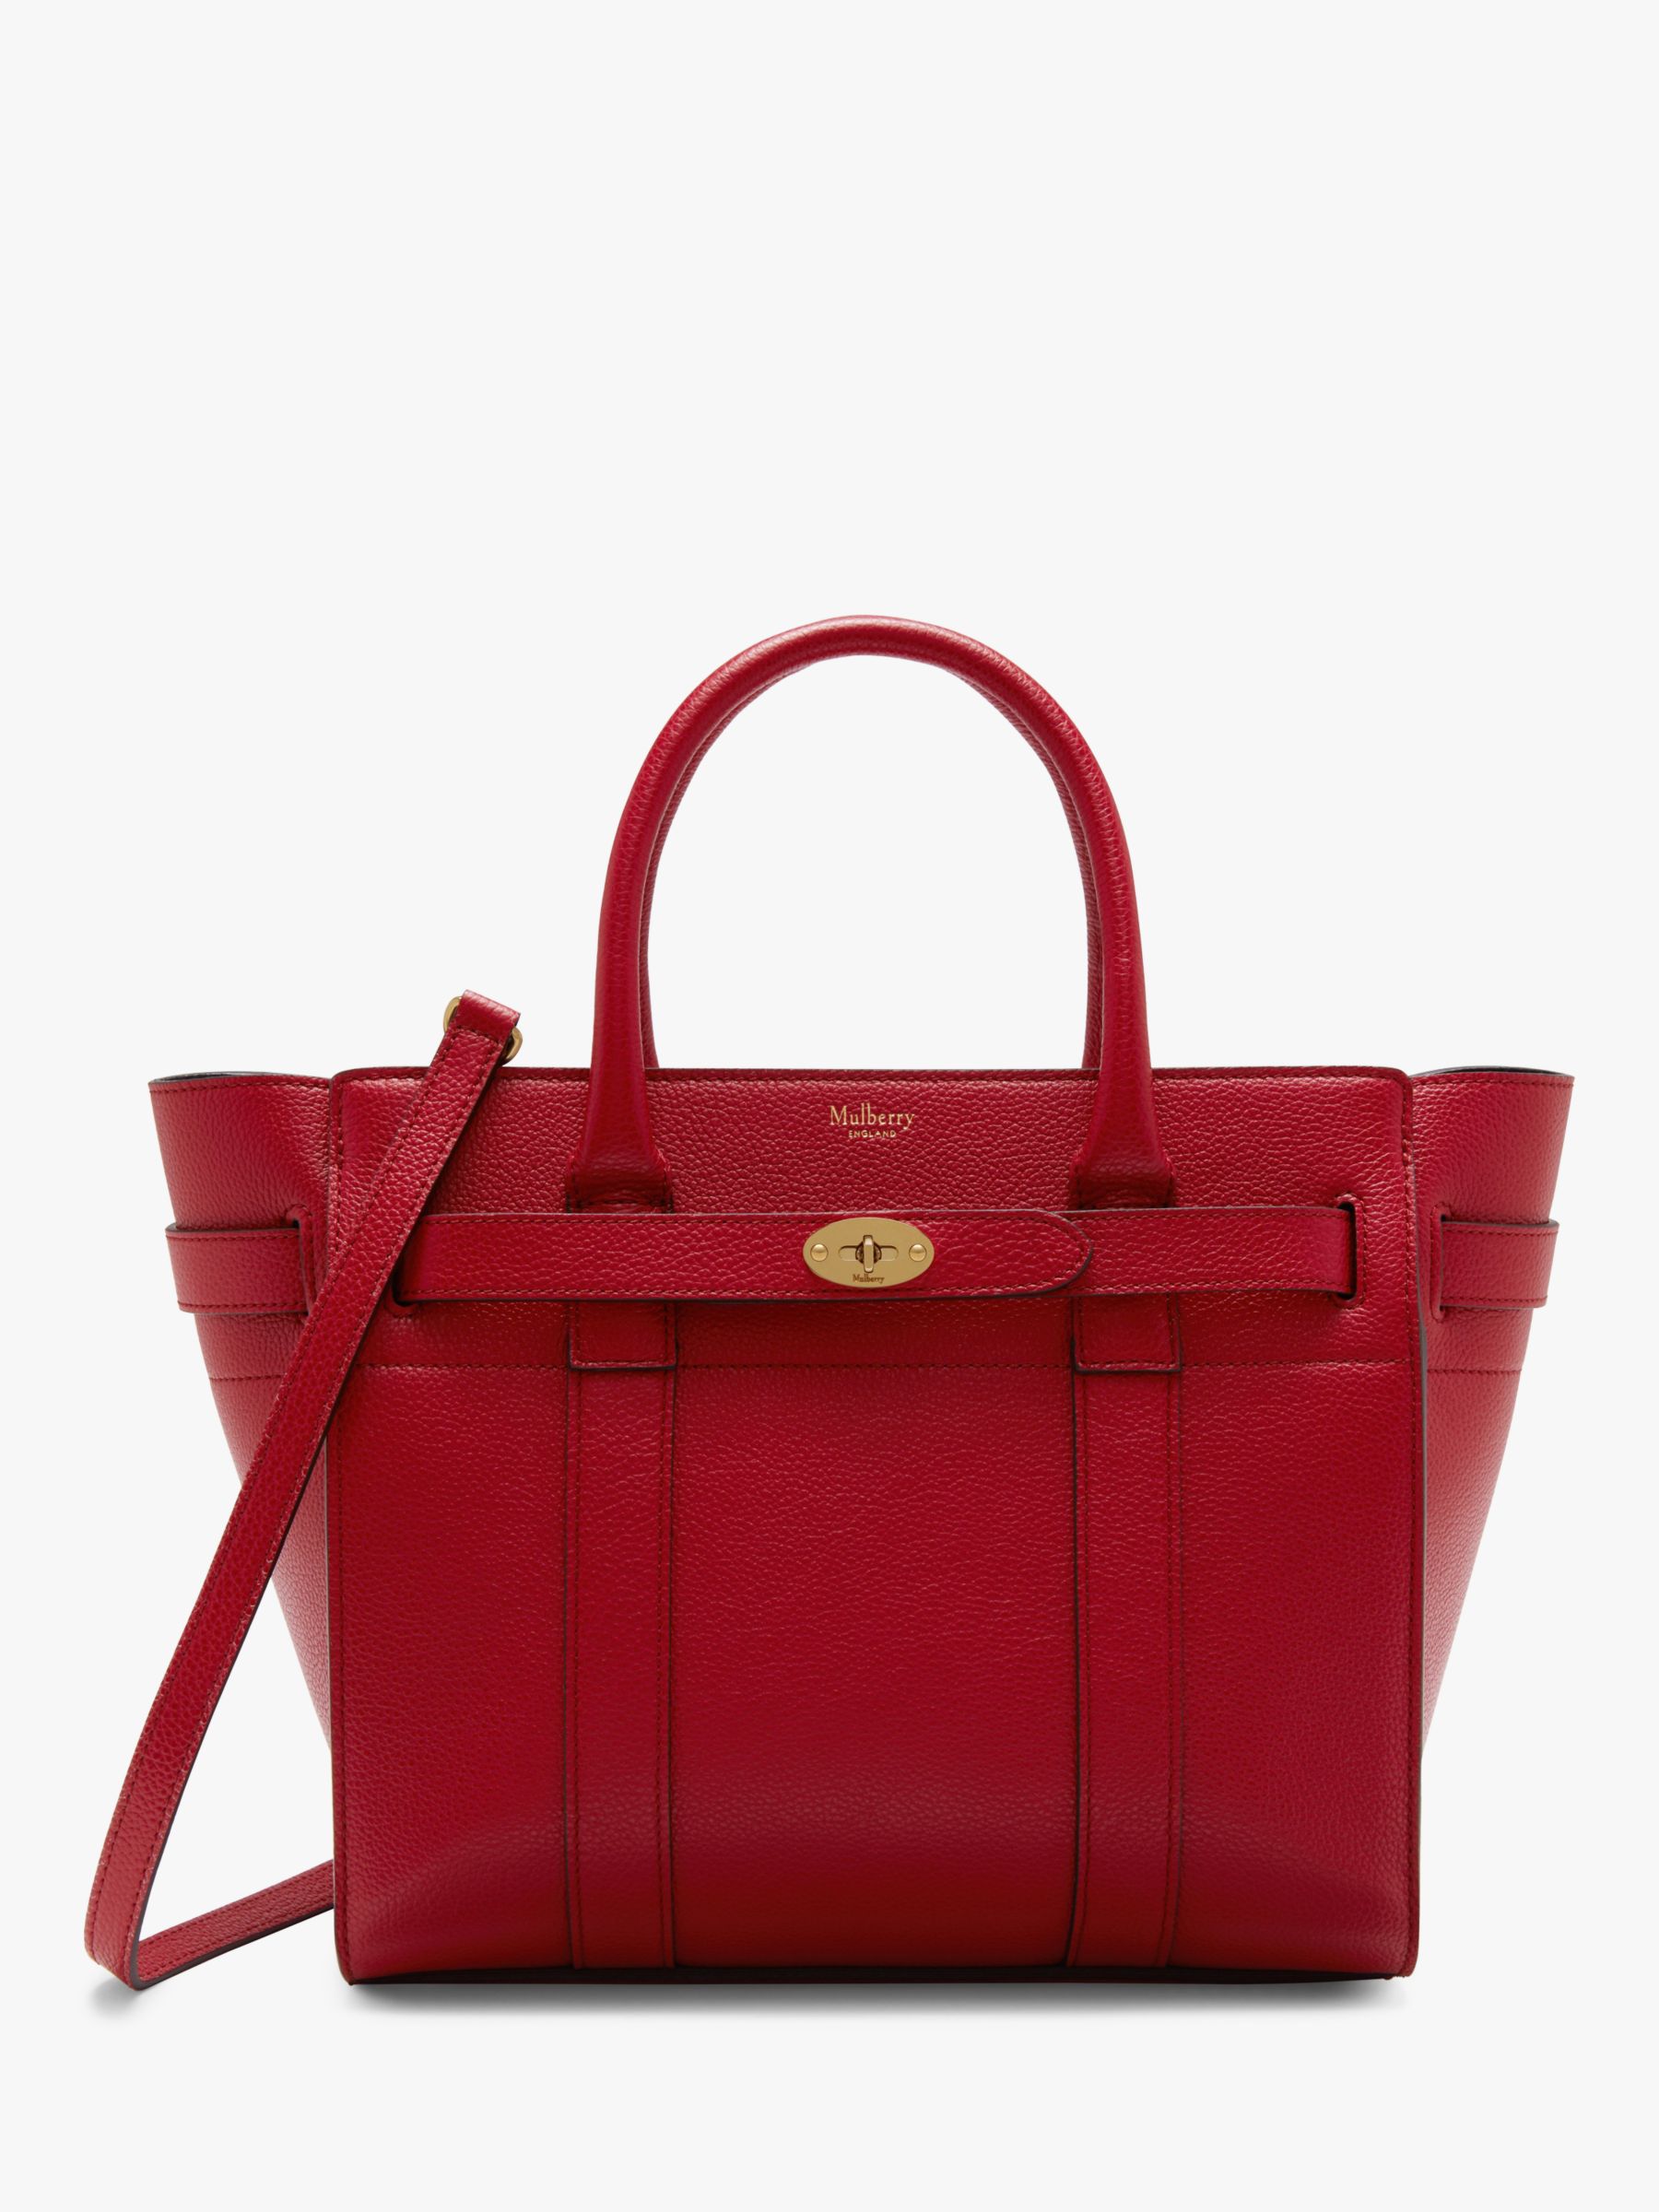 Mulberry Small Bayswater Zipped Classic Grain Leather Tote Bag, Scarlet at John Lewis & Partners